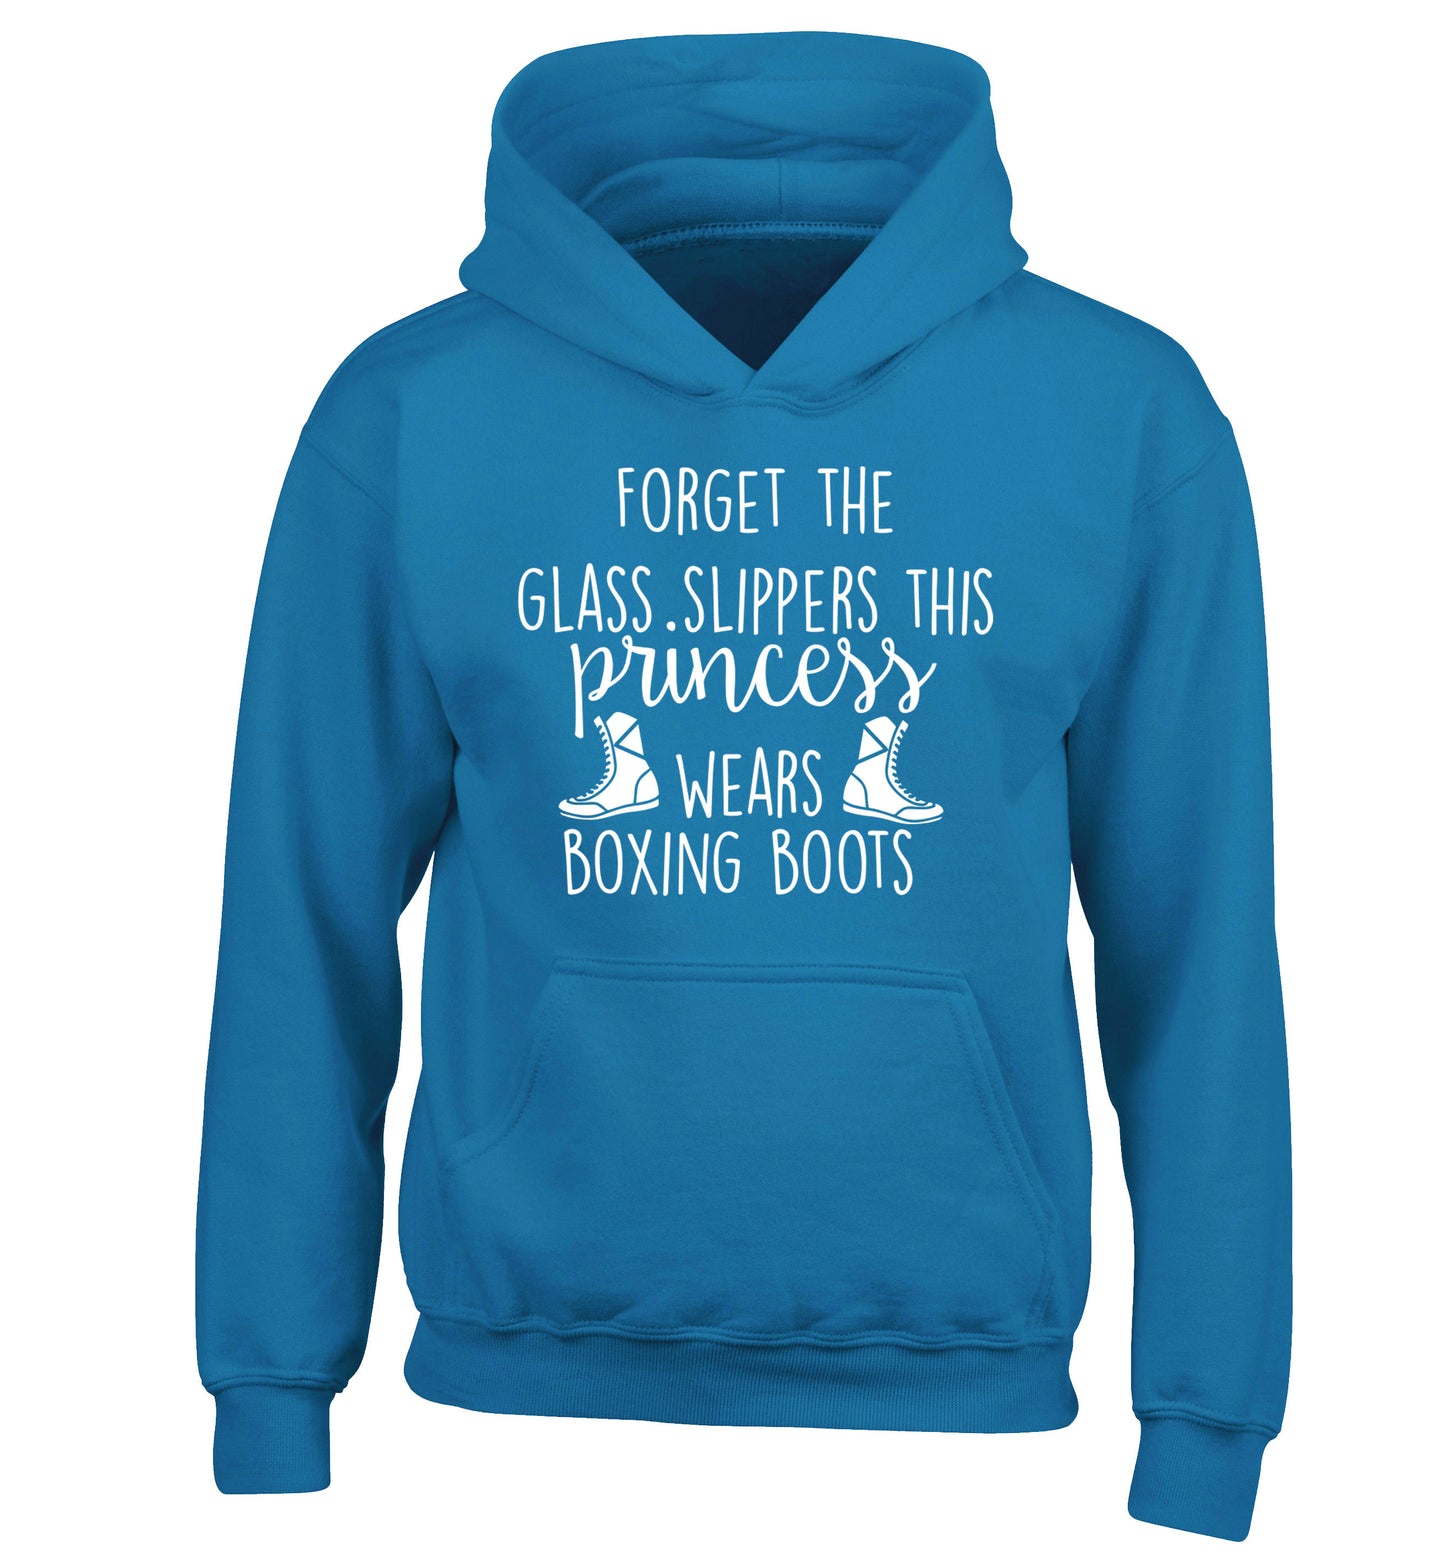 Forget the glass slippers this princess wears boxing boots children's blue hoodie 12-14 Years